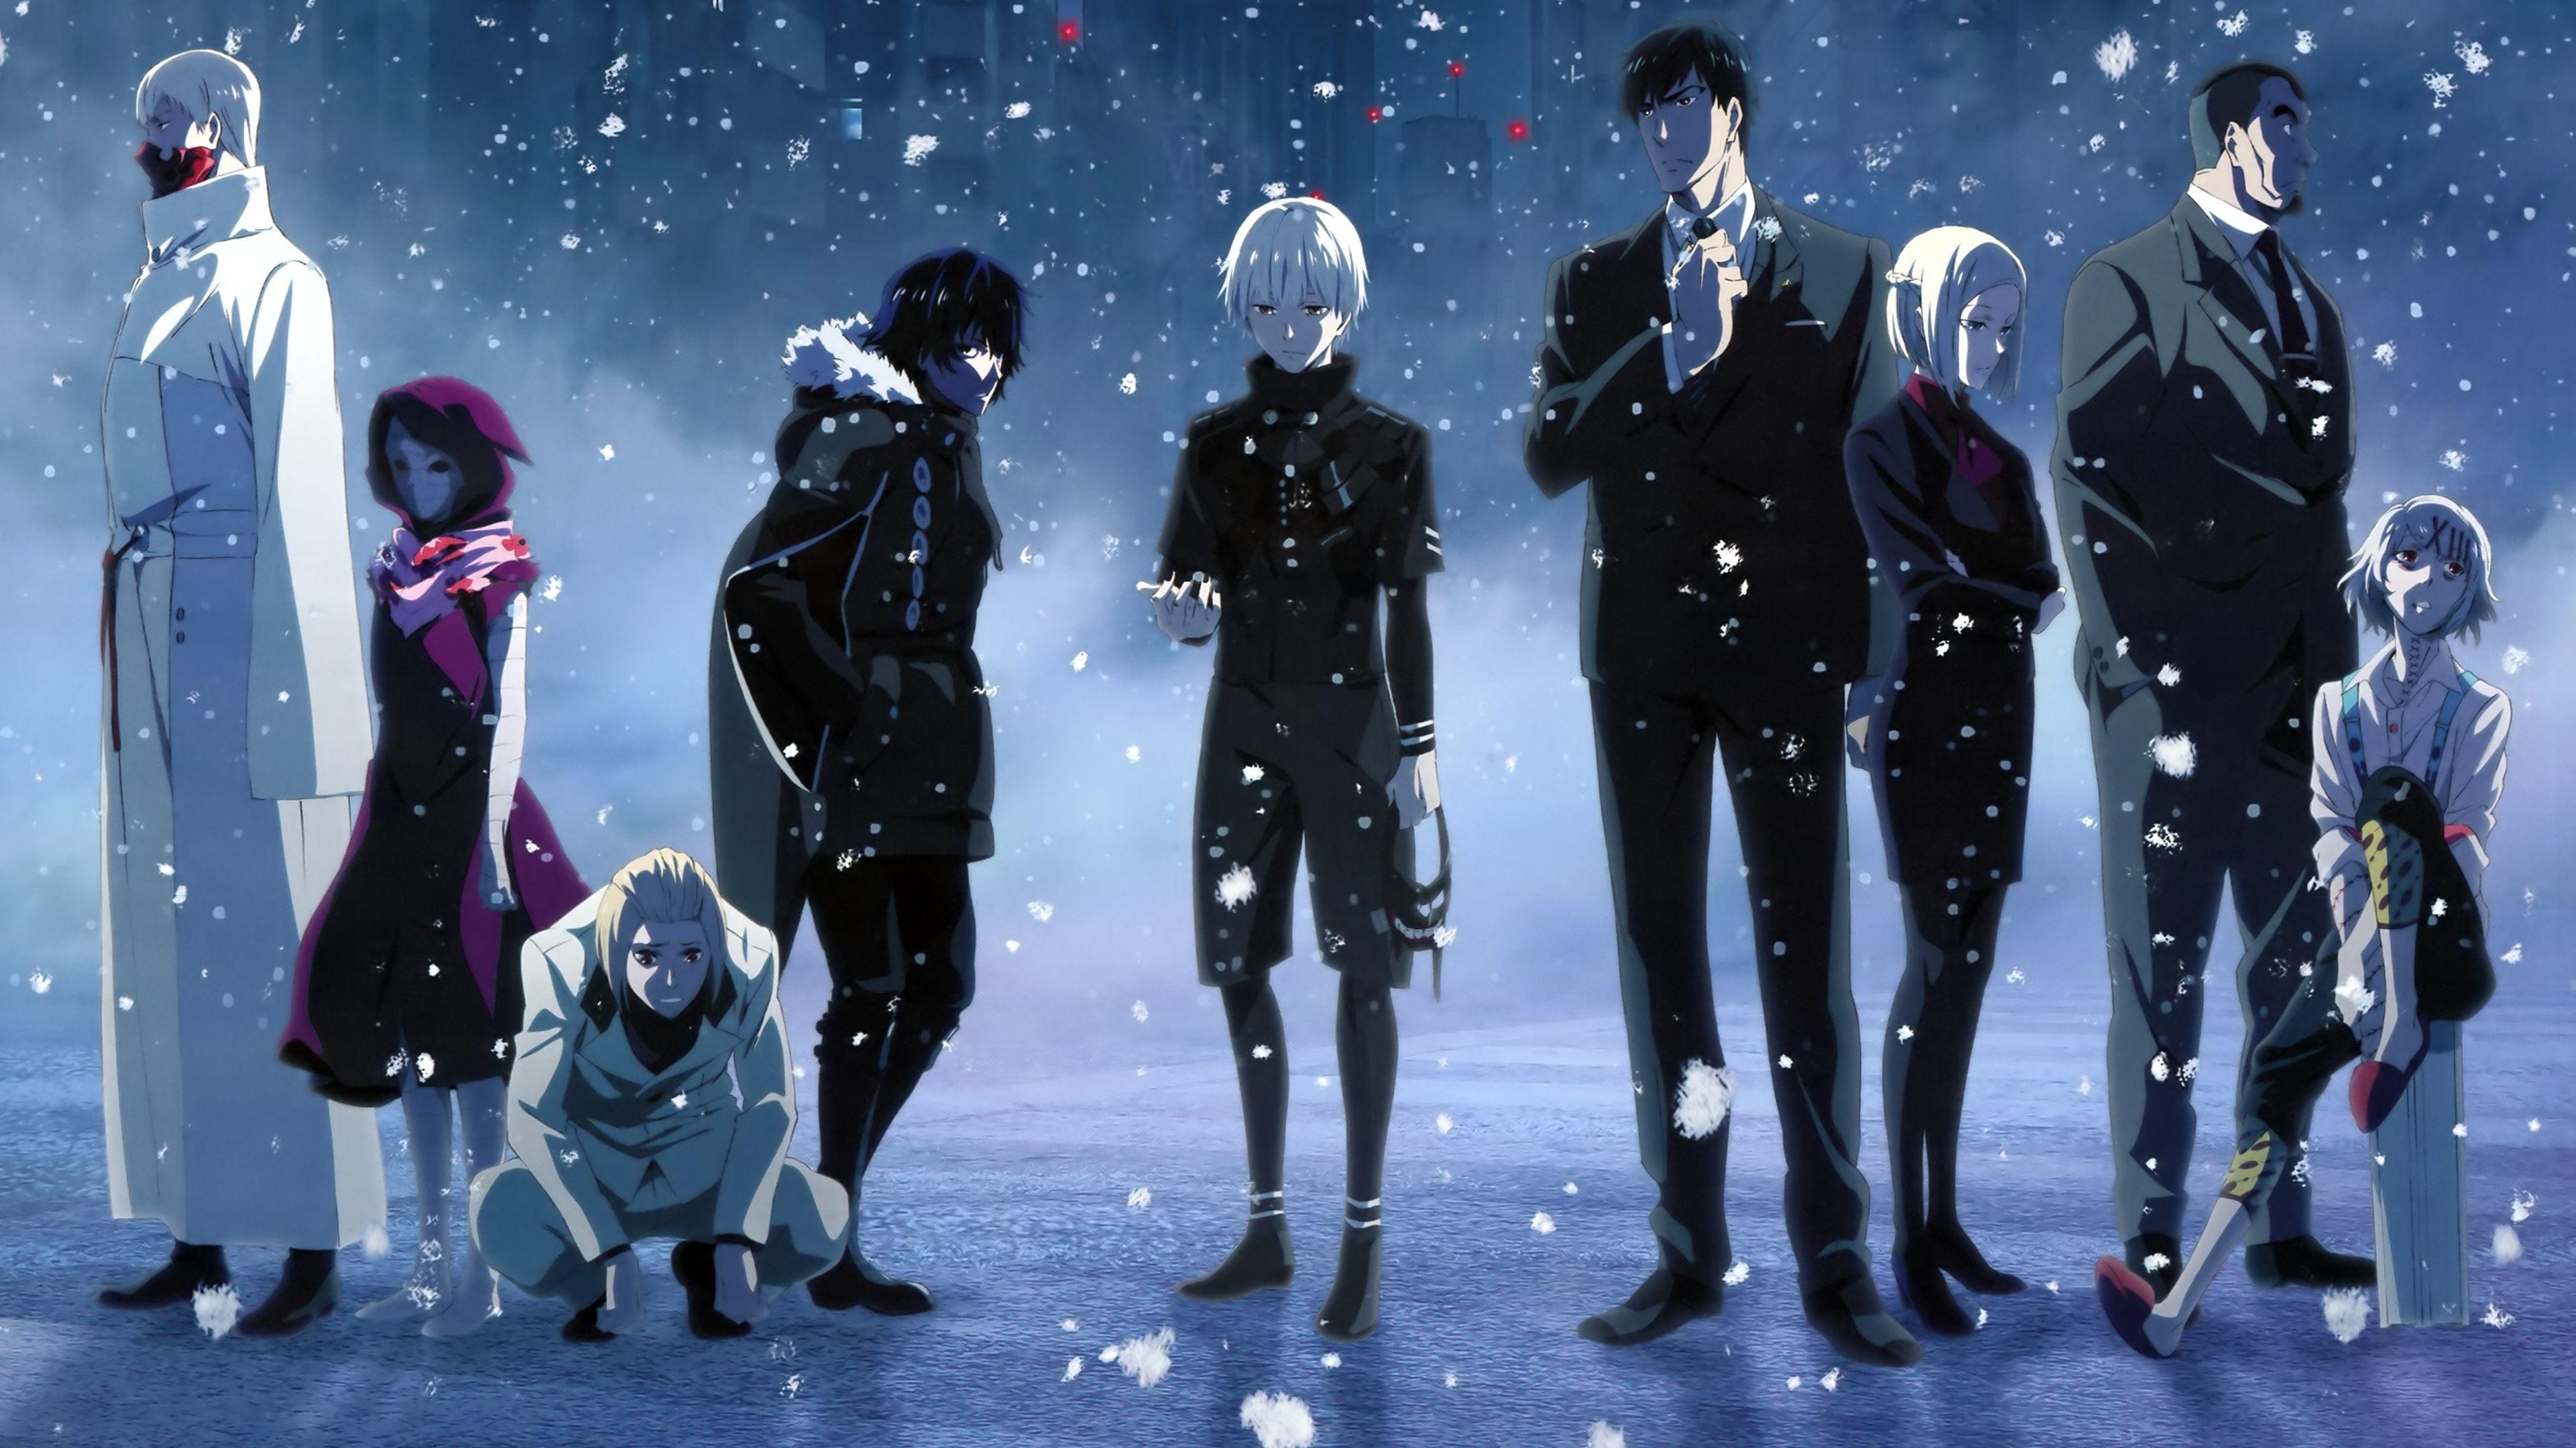 Tokyo Ghoul Characters Hd Wallpapers Top Free Tokyo Ghoul Characters Hd Backgrounds Wallpaperaccess